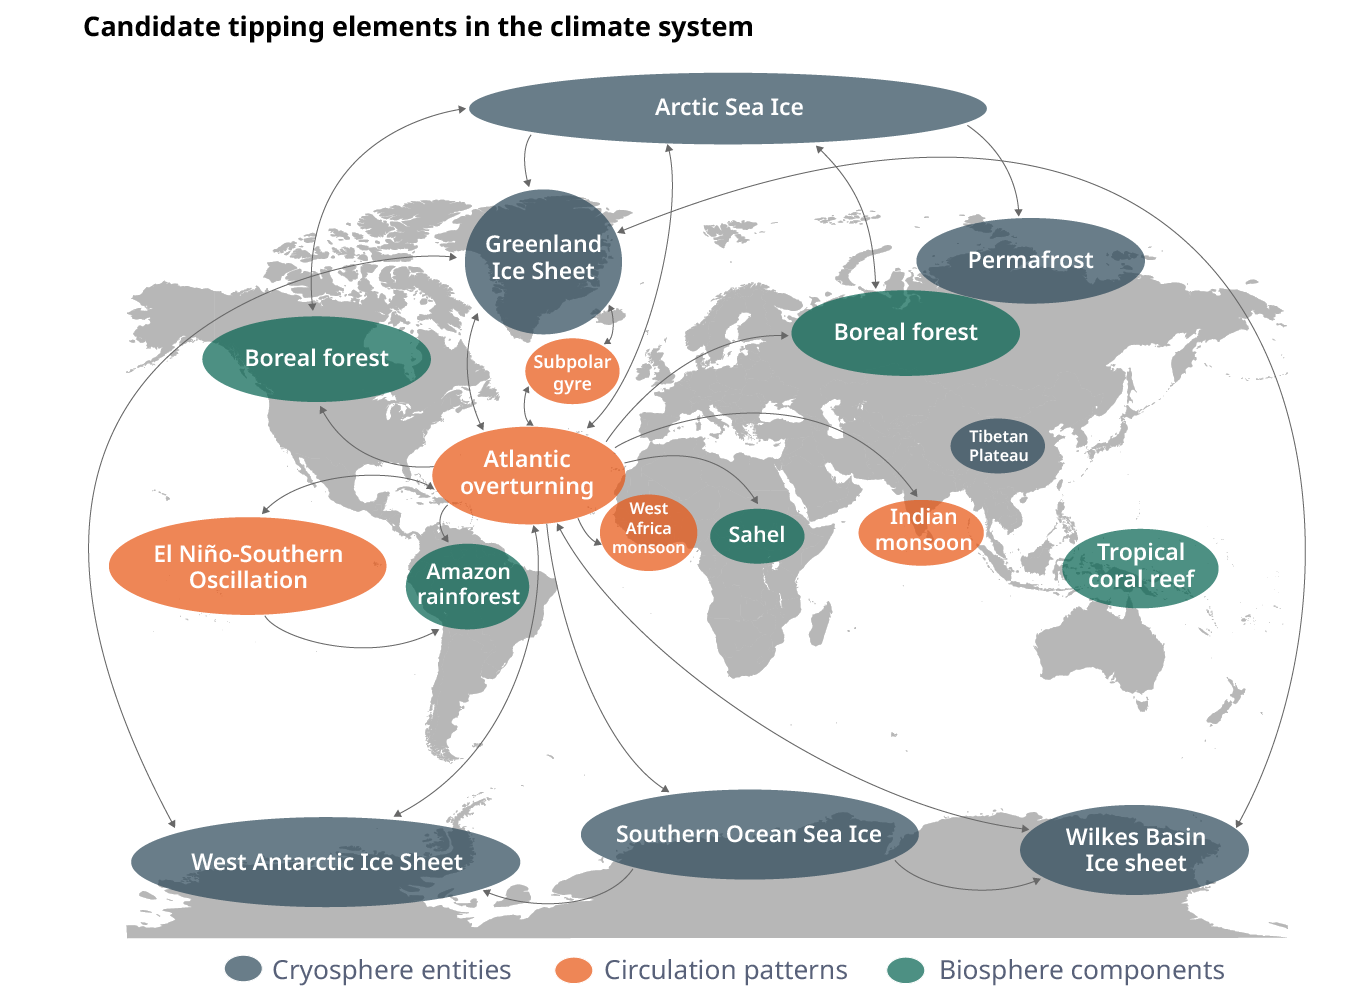 Diagram of candidate tipping elements in the climate system